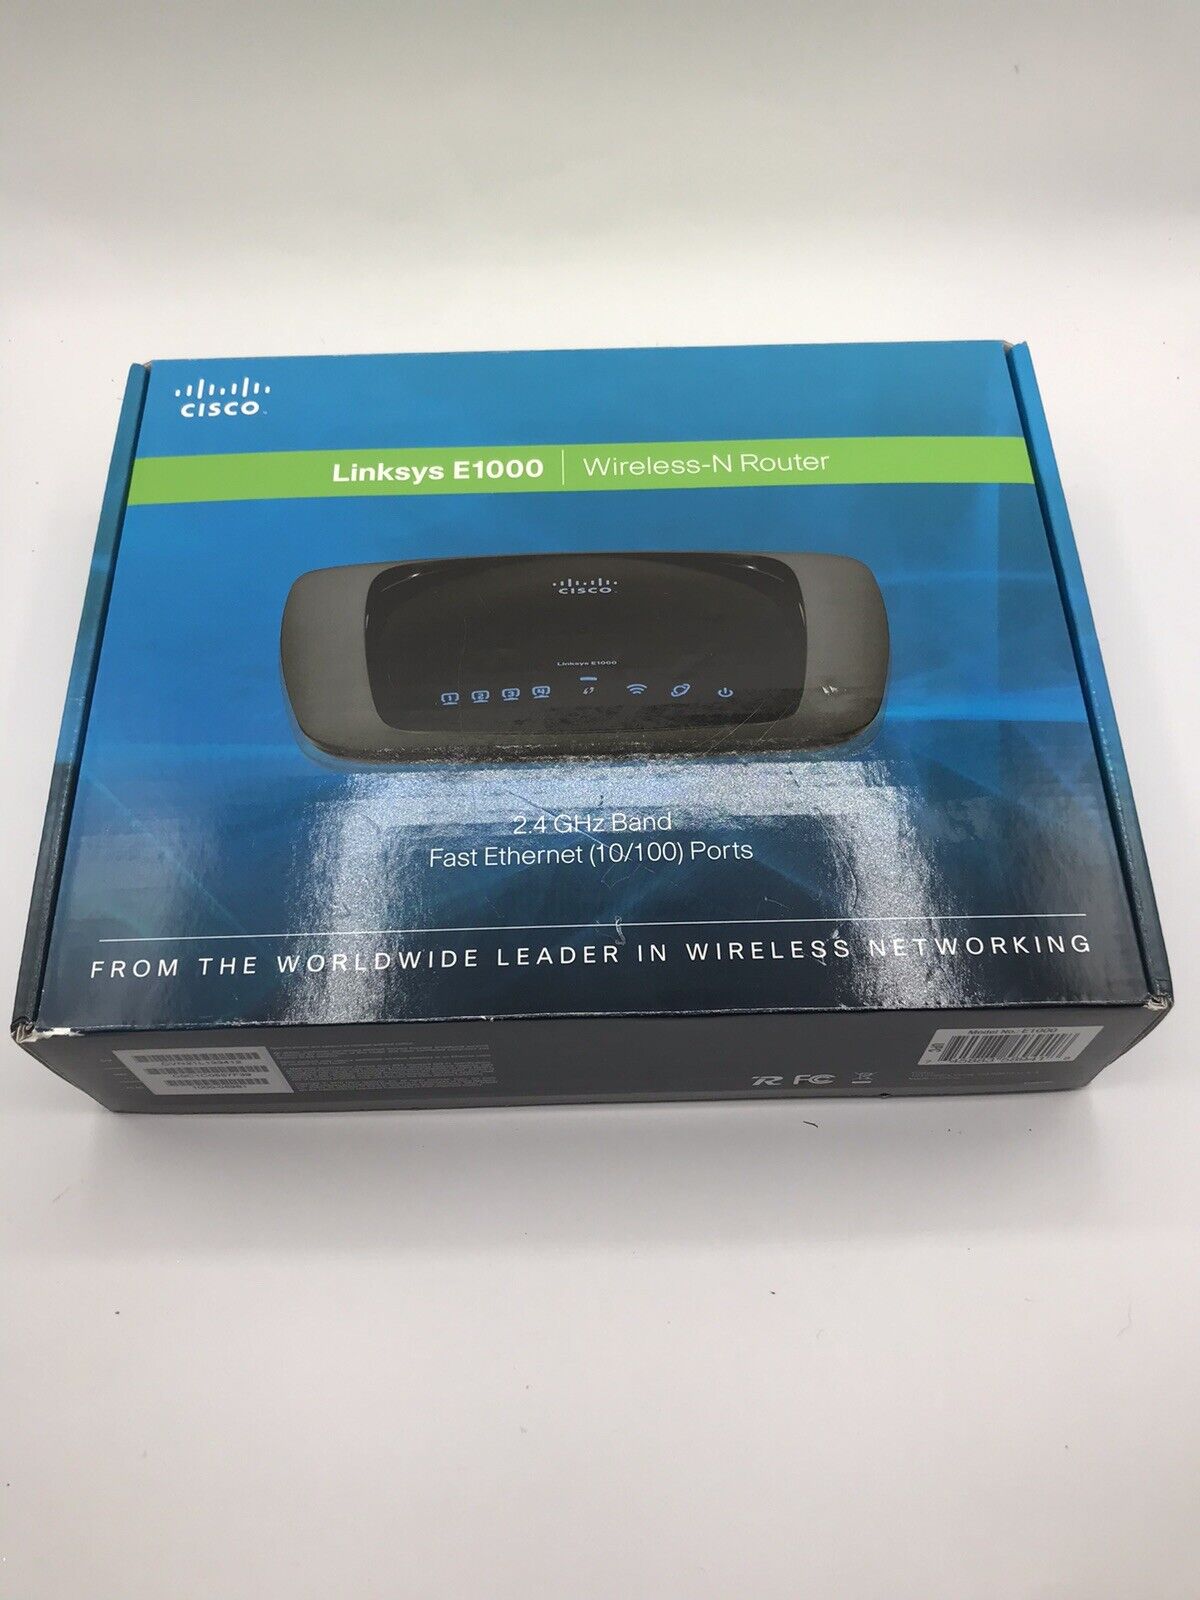 CISCO Linksys E1000 Wireless-N Router 300 Mbps 4-Port 10/100, NEW In Open Box